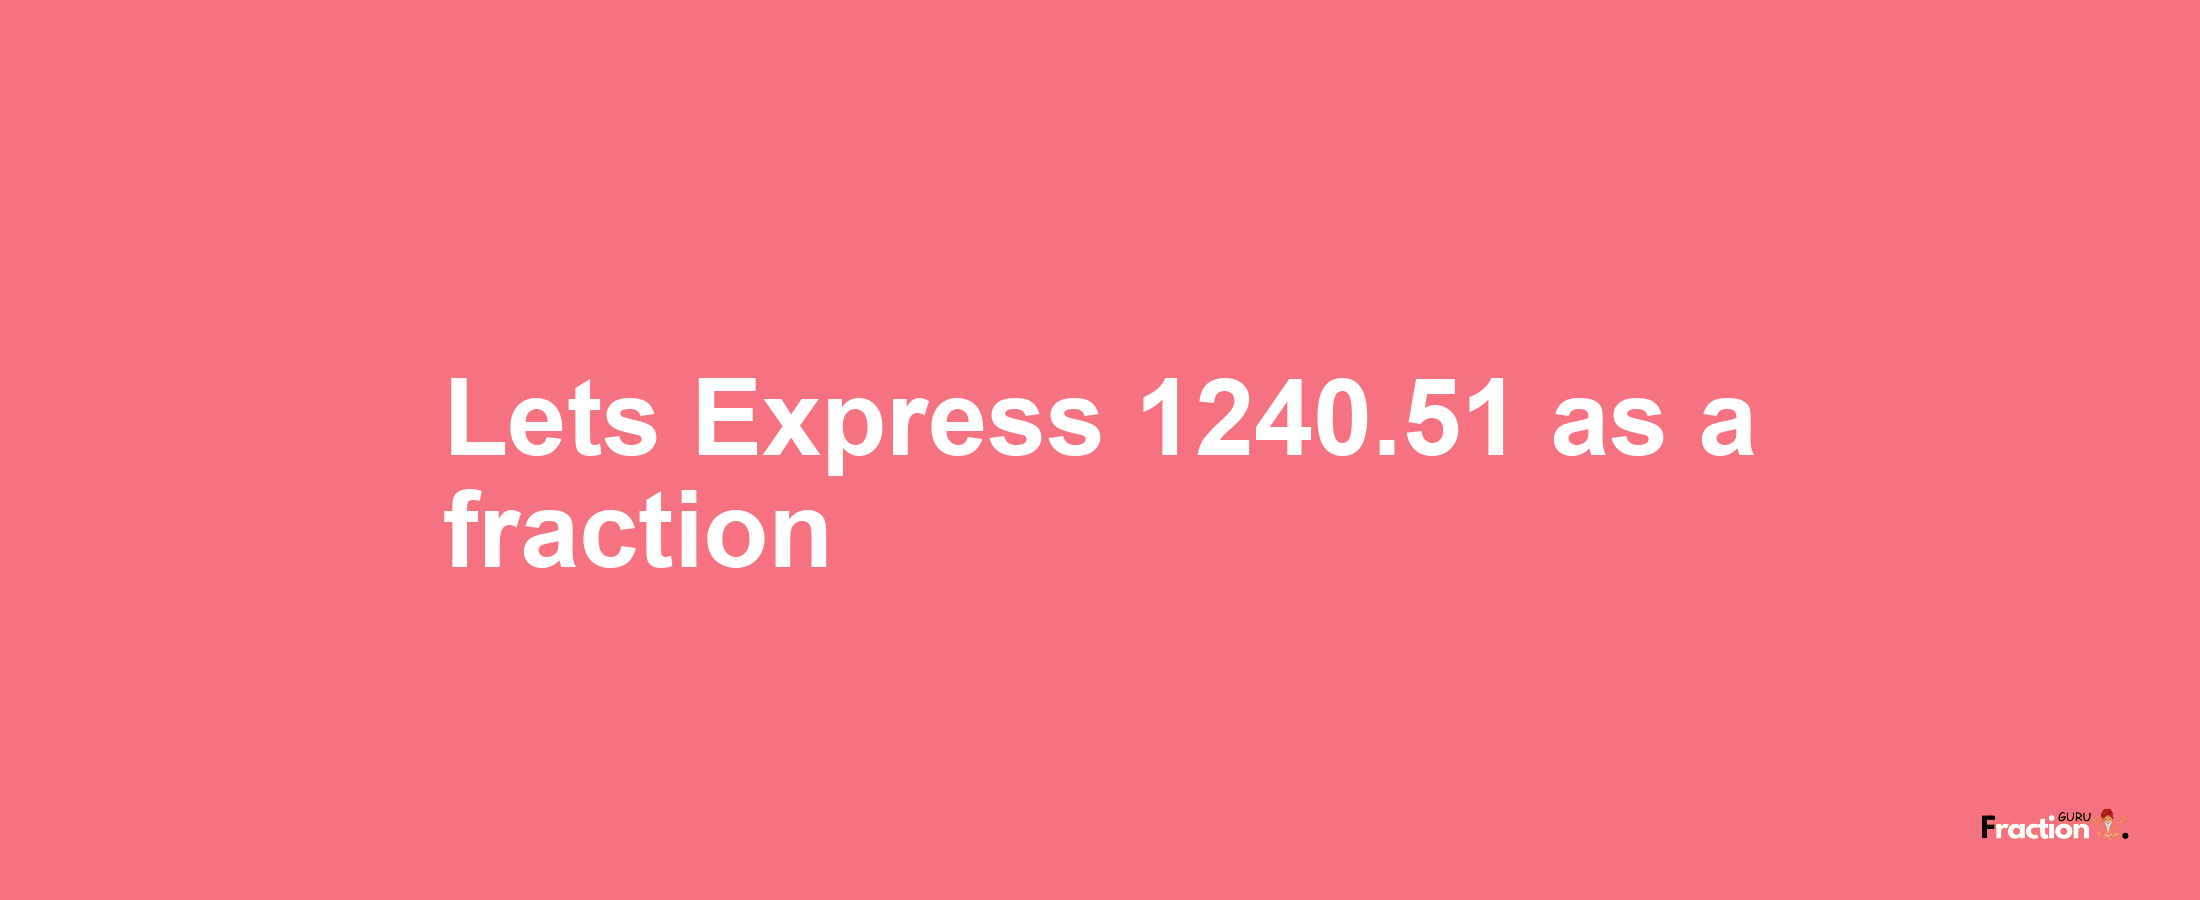 Lets Express 1240.51 as afraction